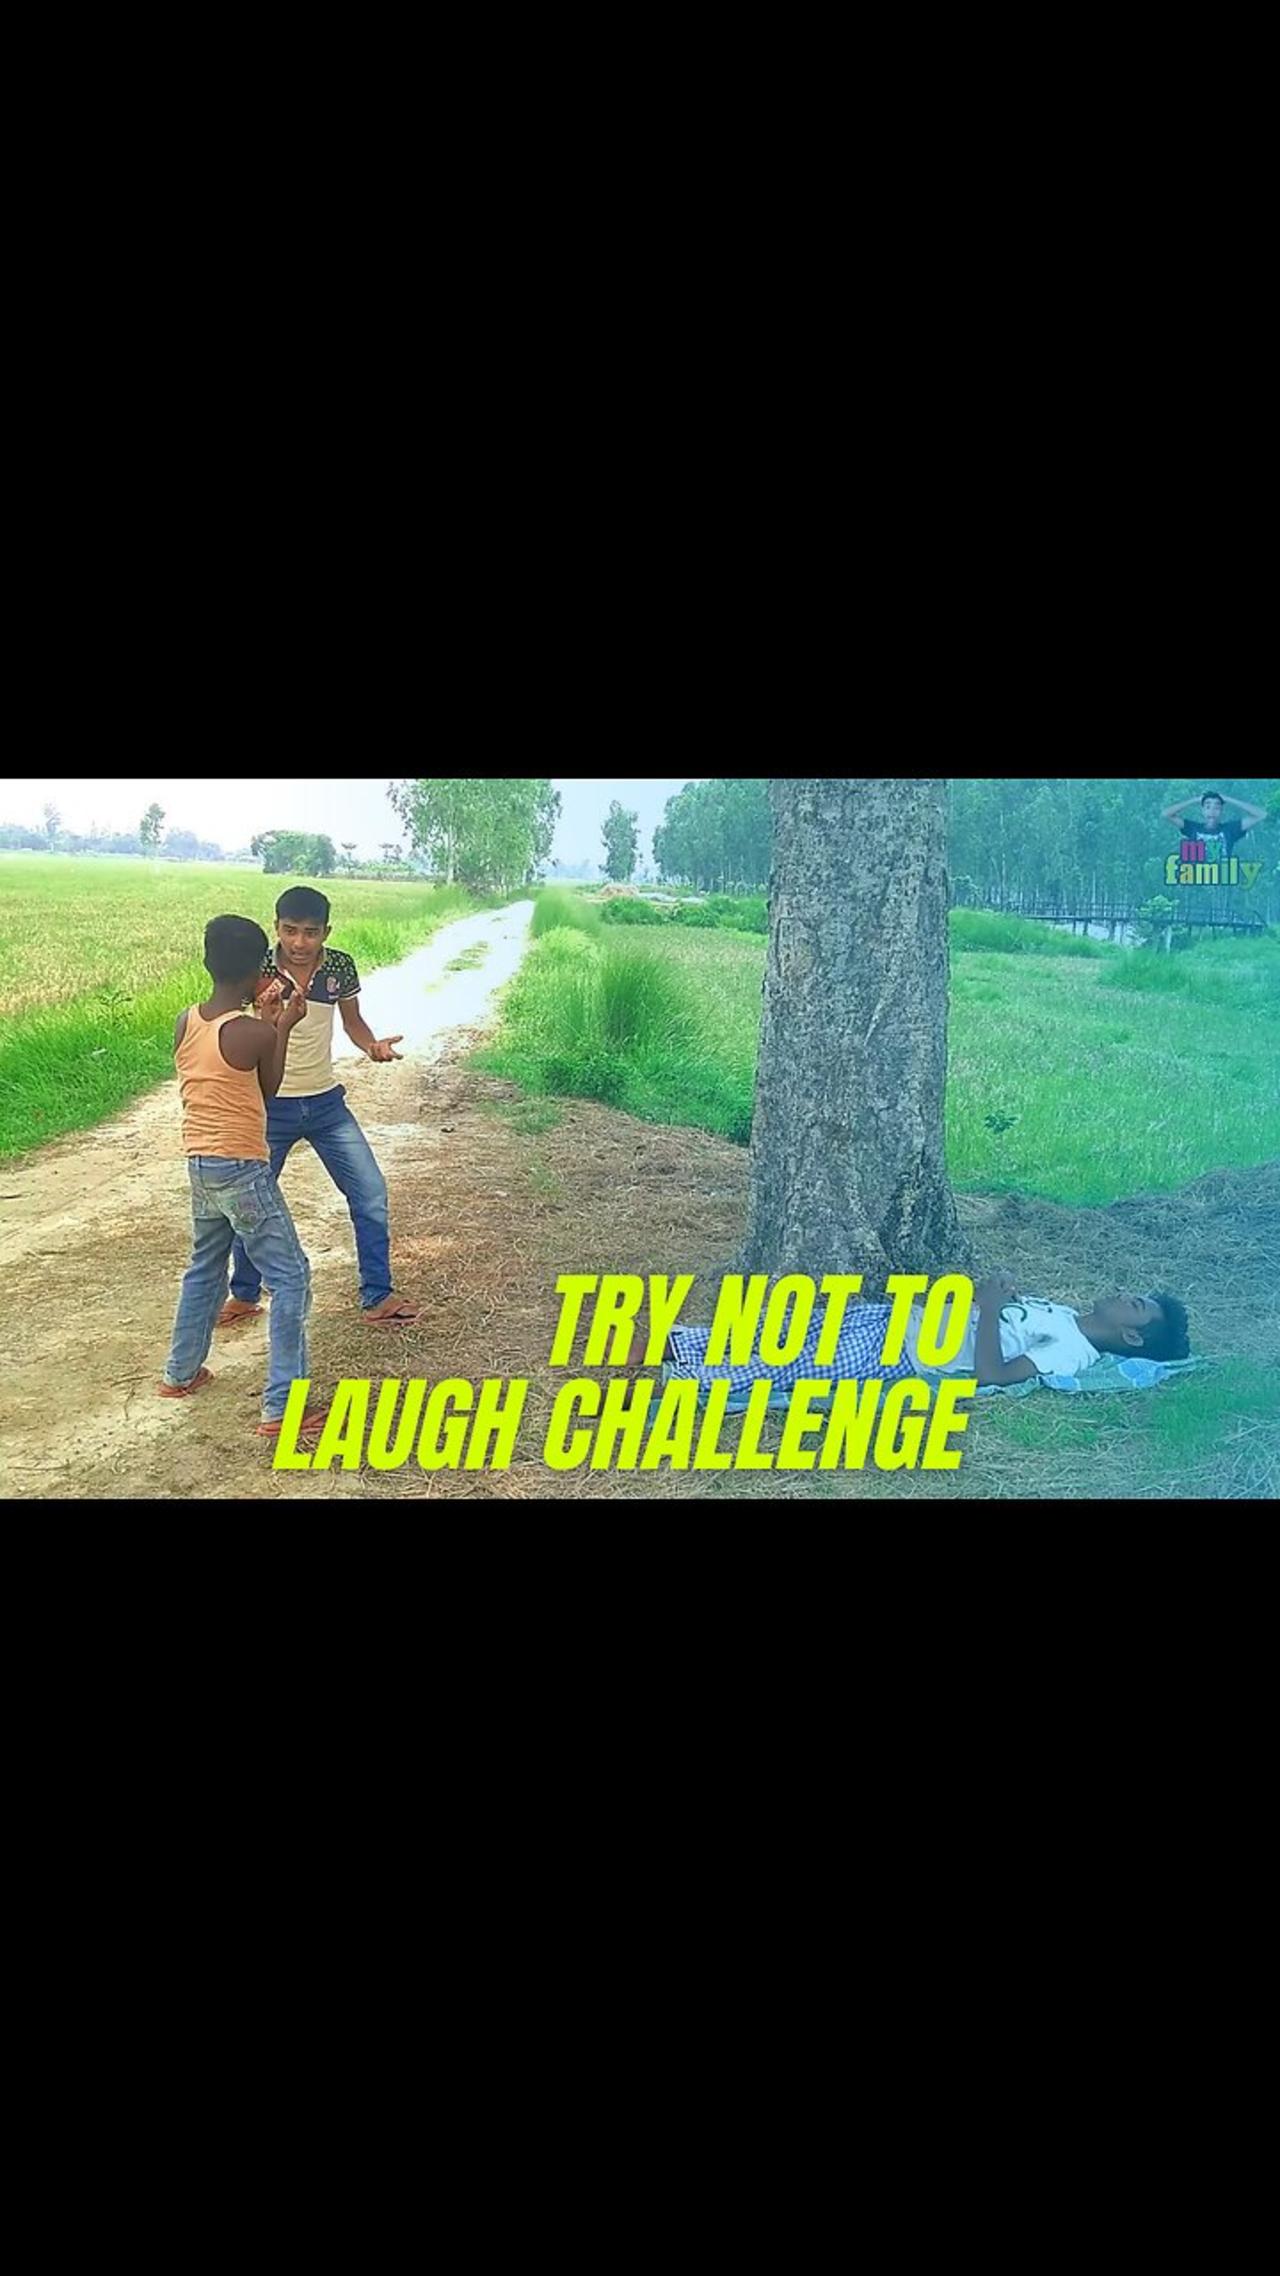 TRY NOT TO LAUGH CHALLENGE, PART 7 OF THE 2019 FUNNY VIDEO COLLECTION